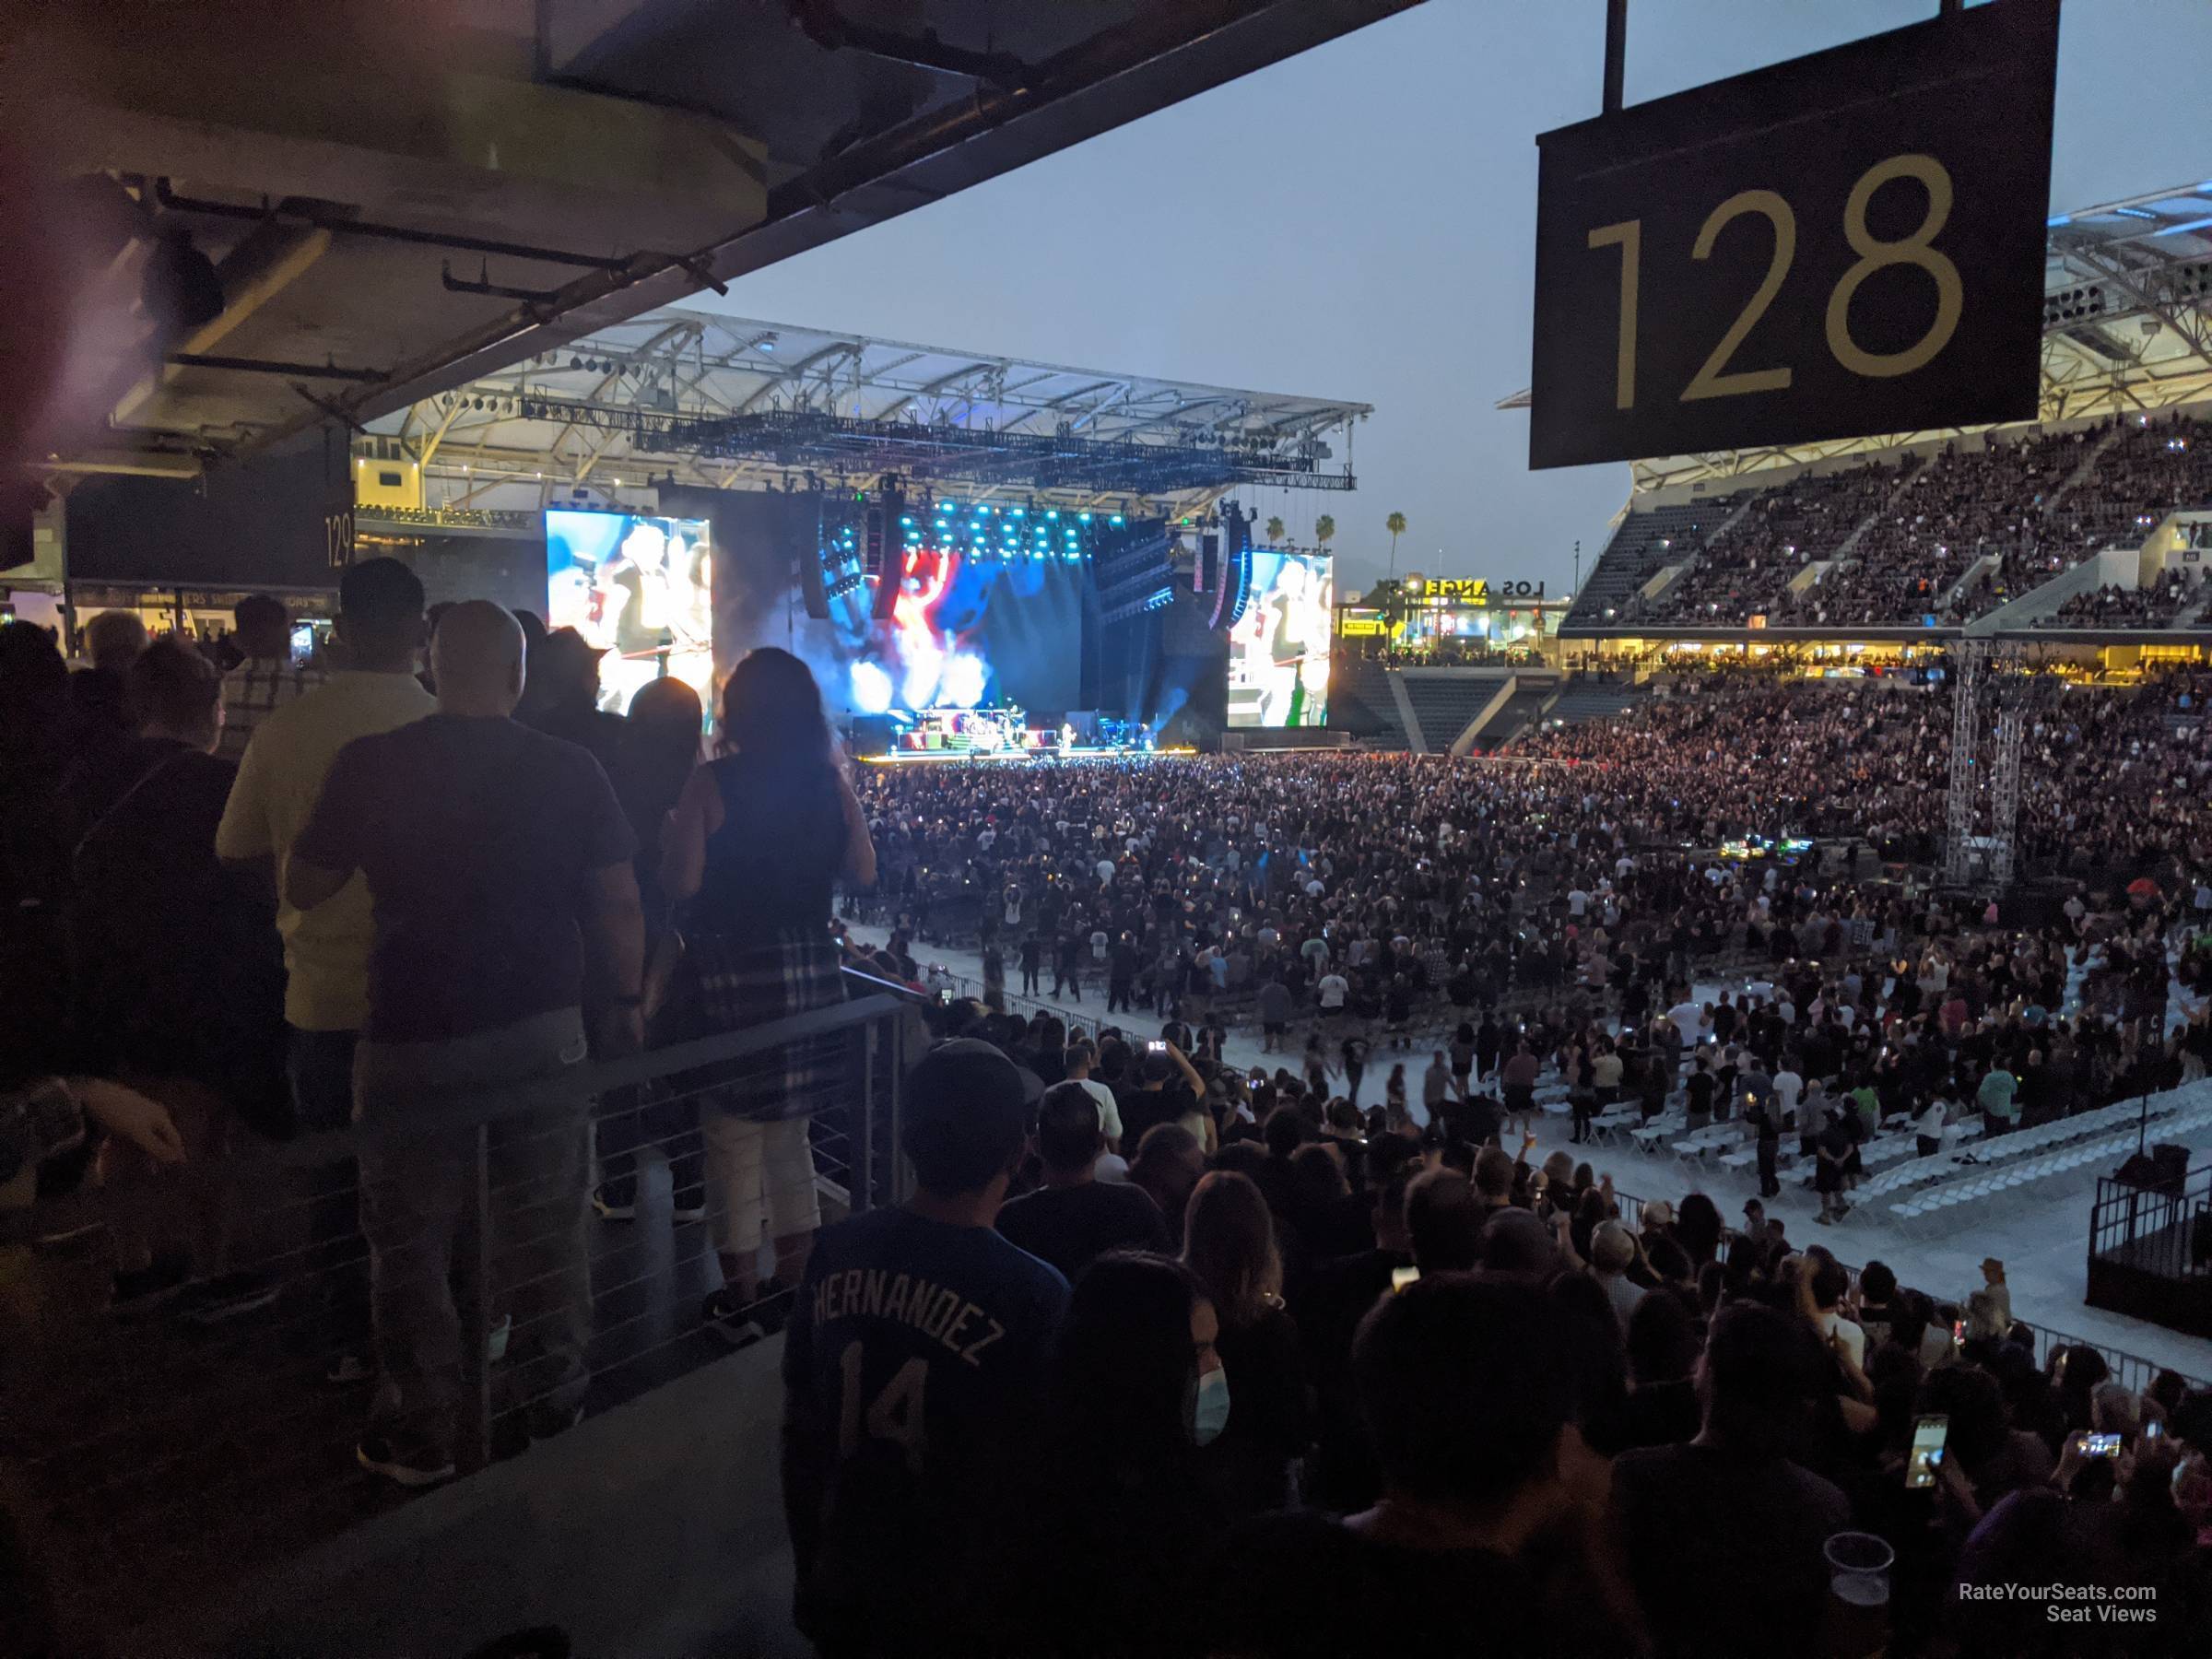 section 128 seat view  for concert - bmo stadium